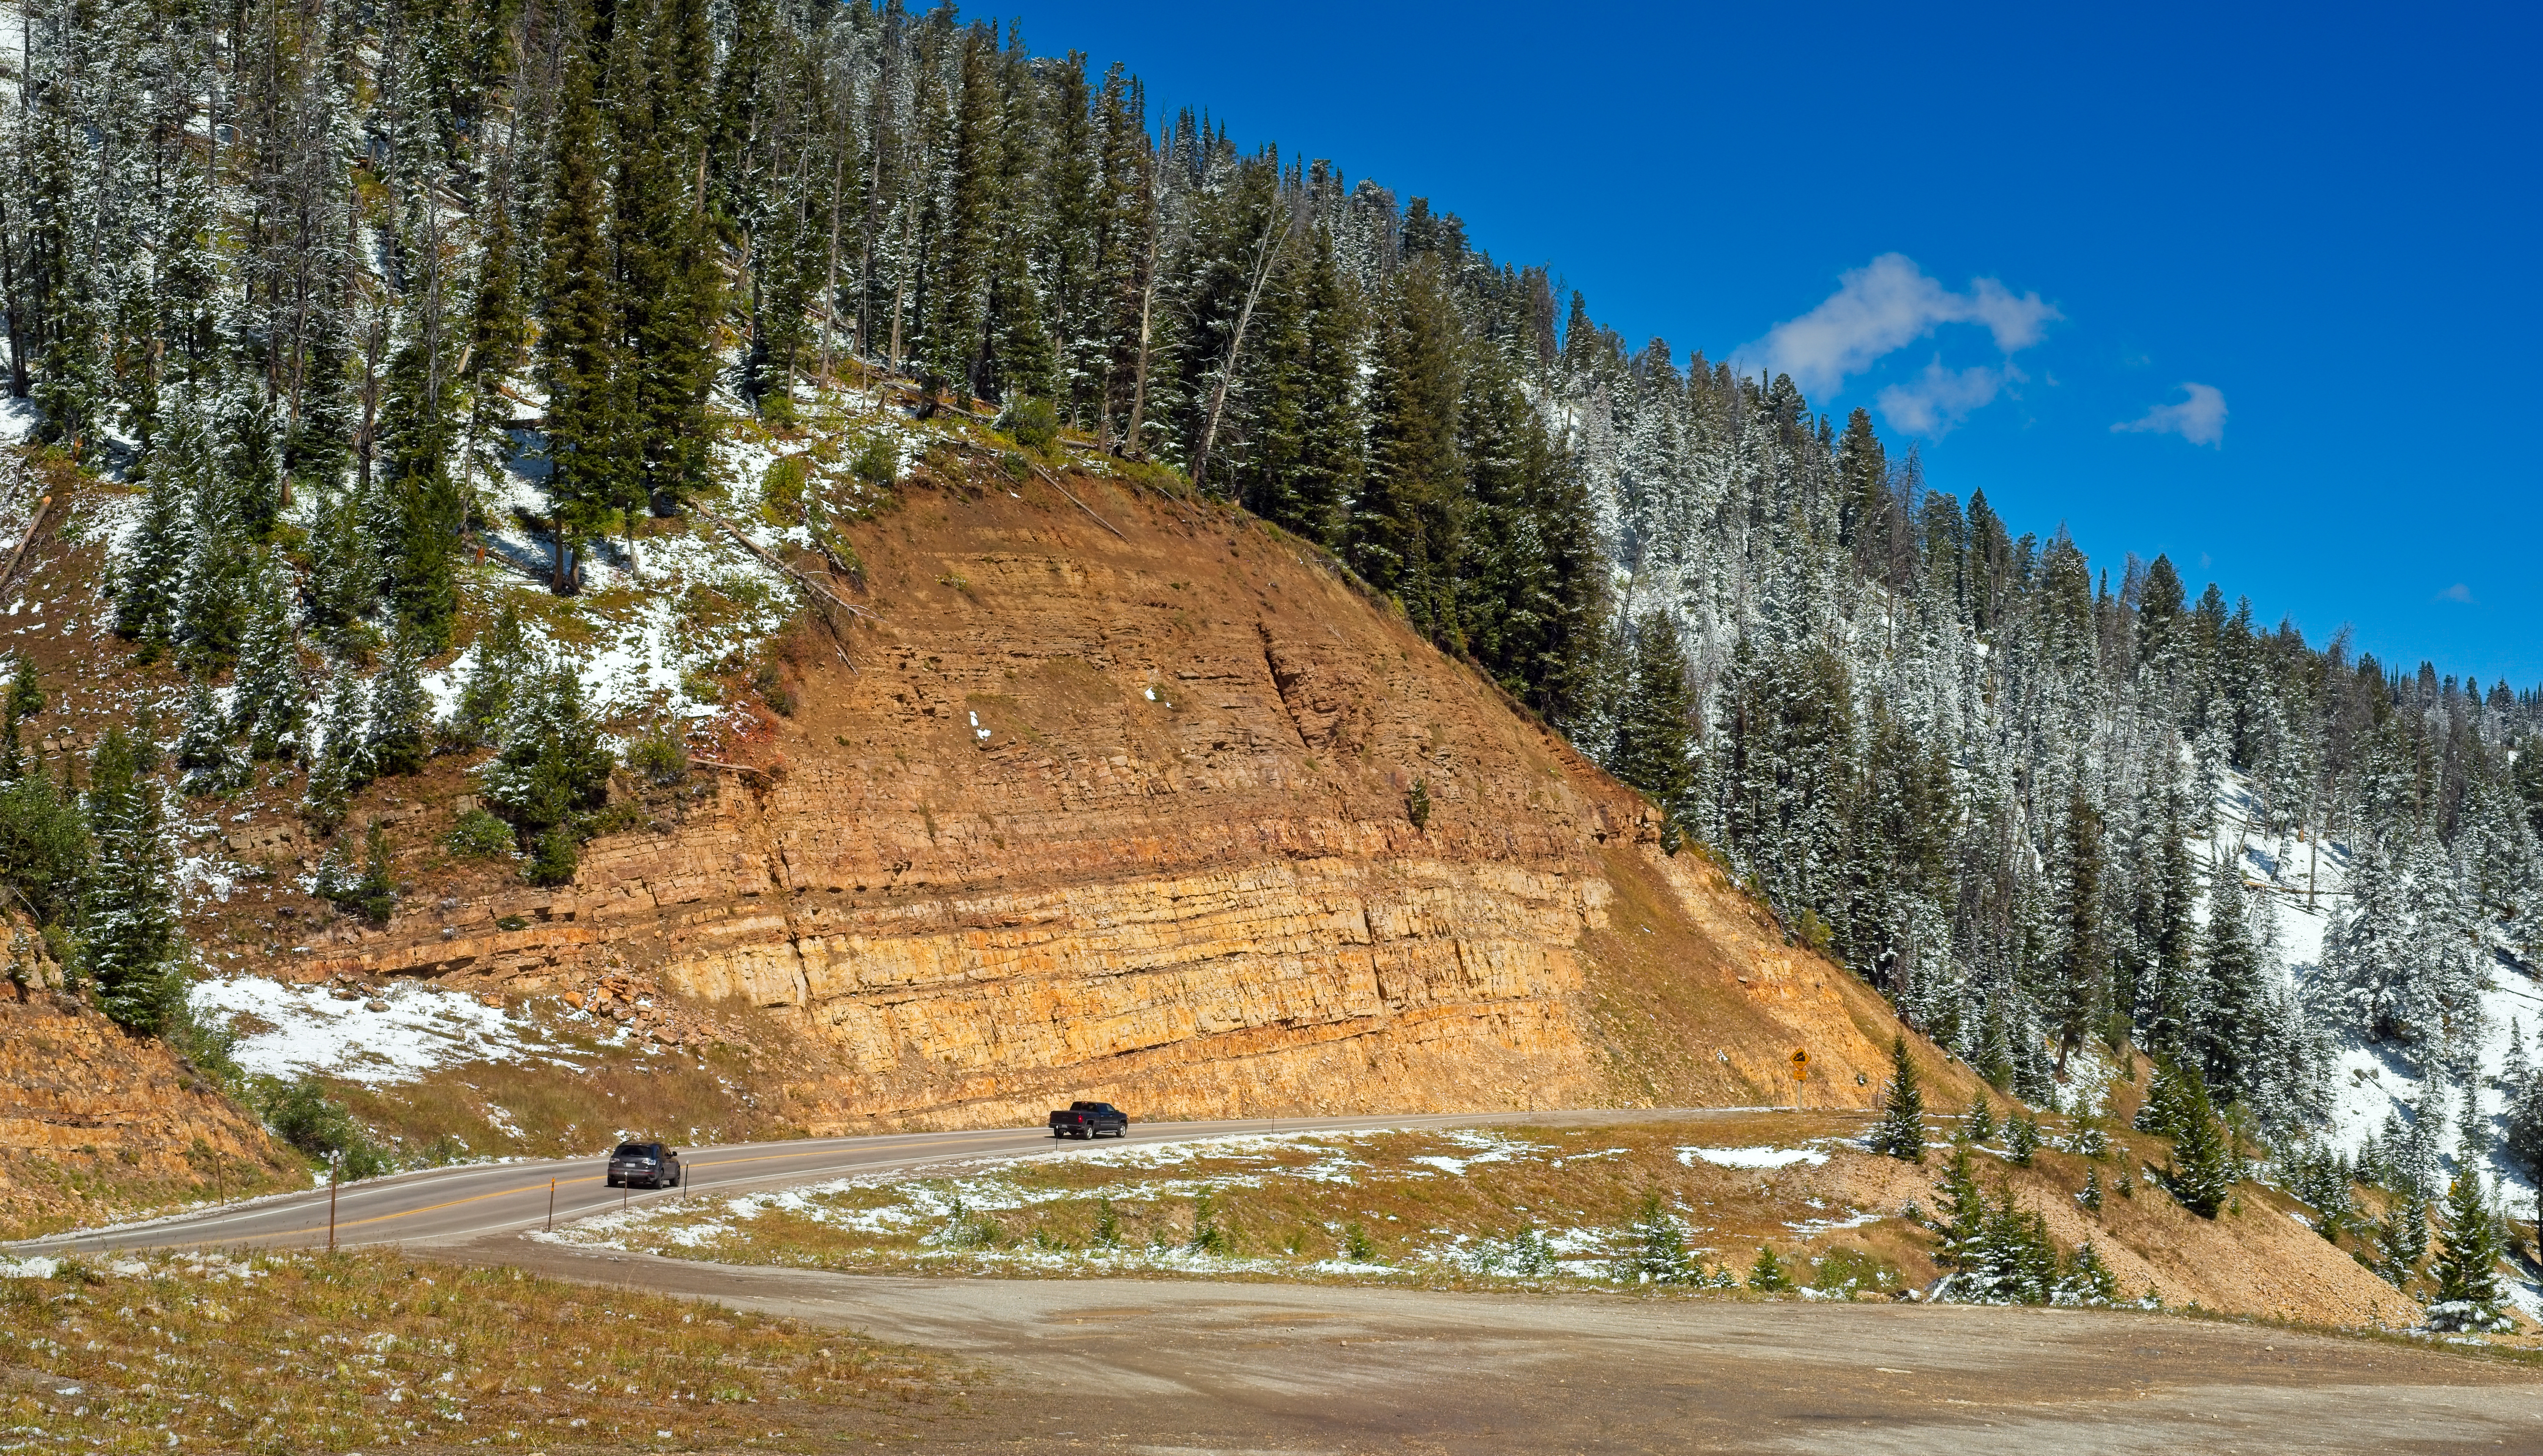 Landslide Causes ‘Catastrophic’ Failure of Teton Pass in Wyoming